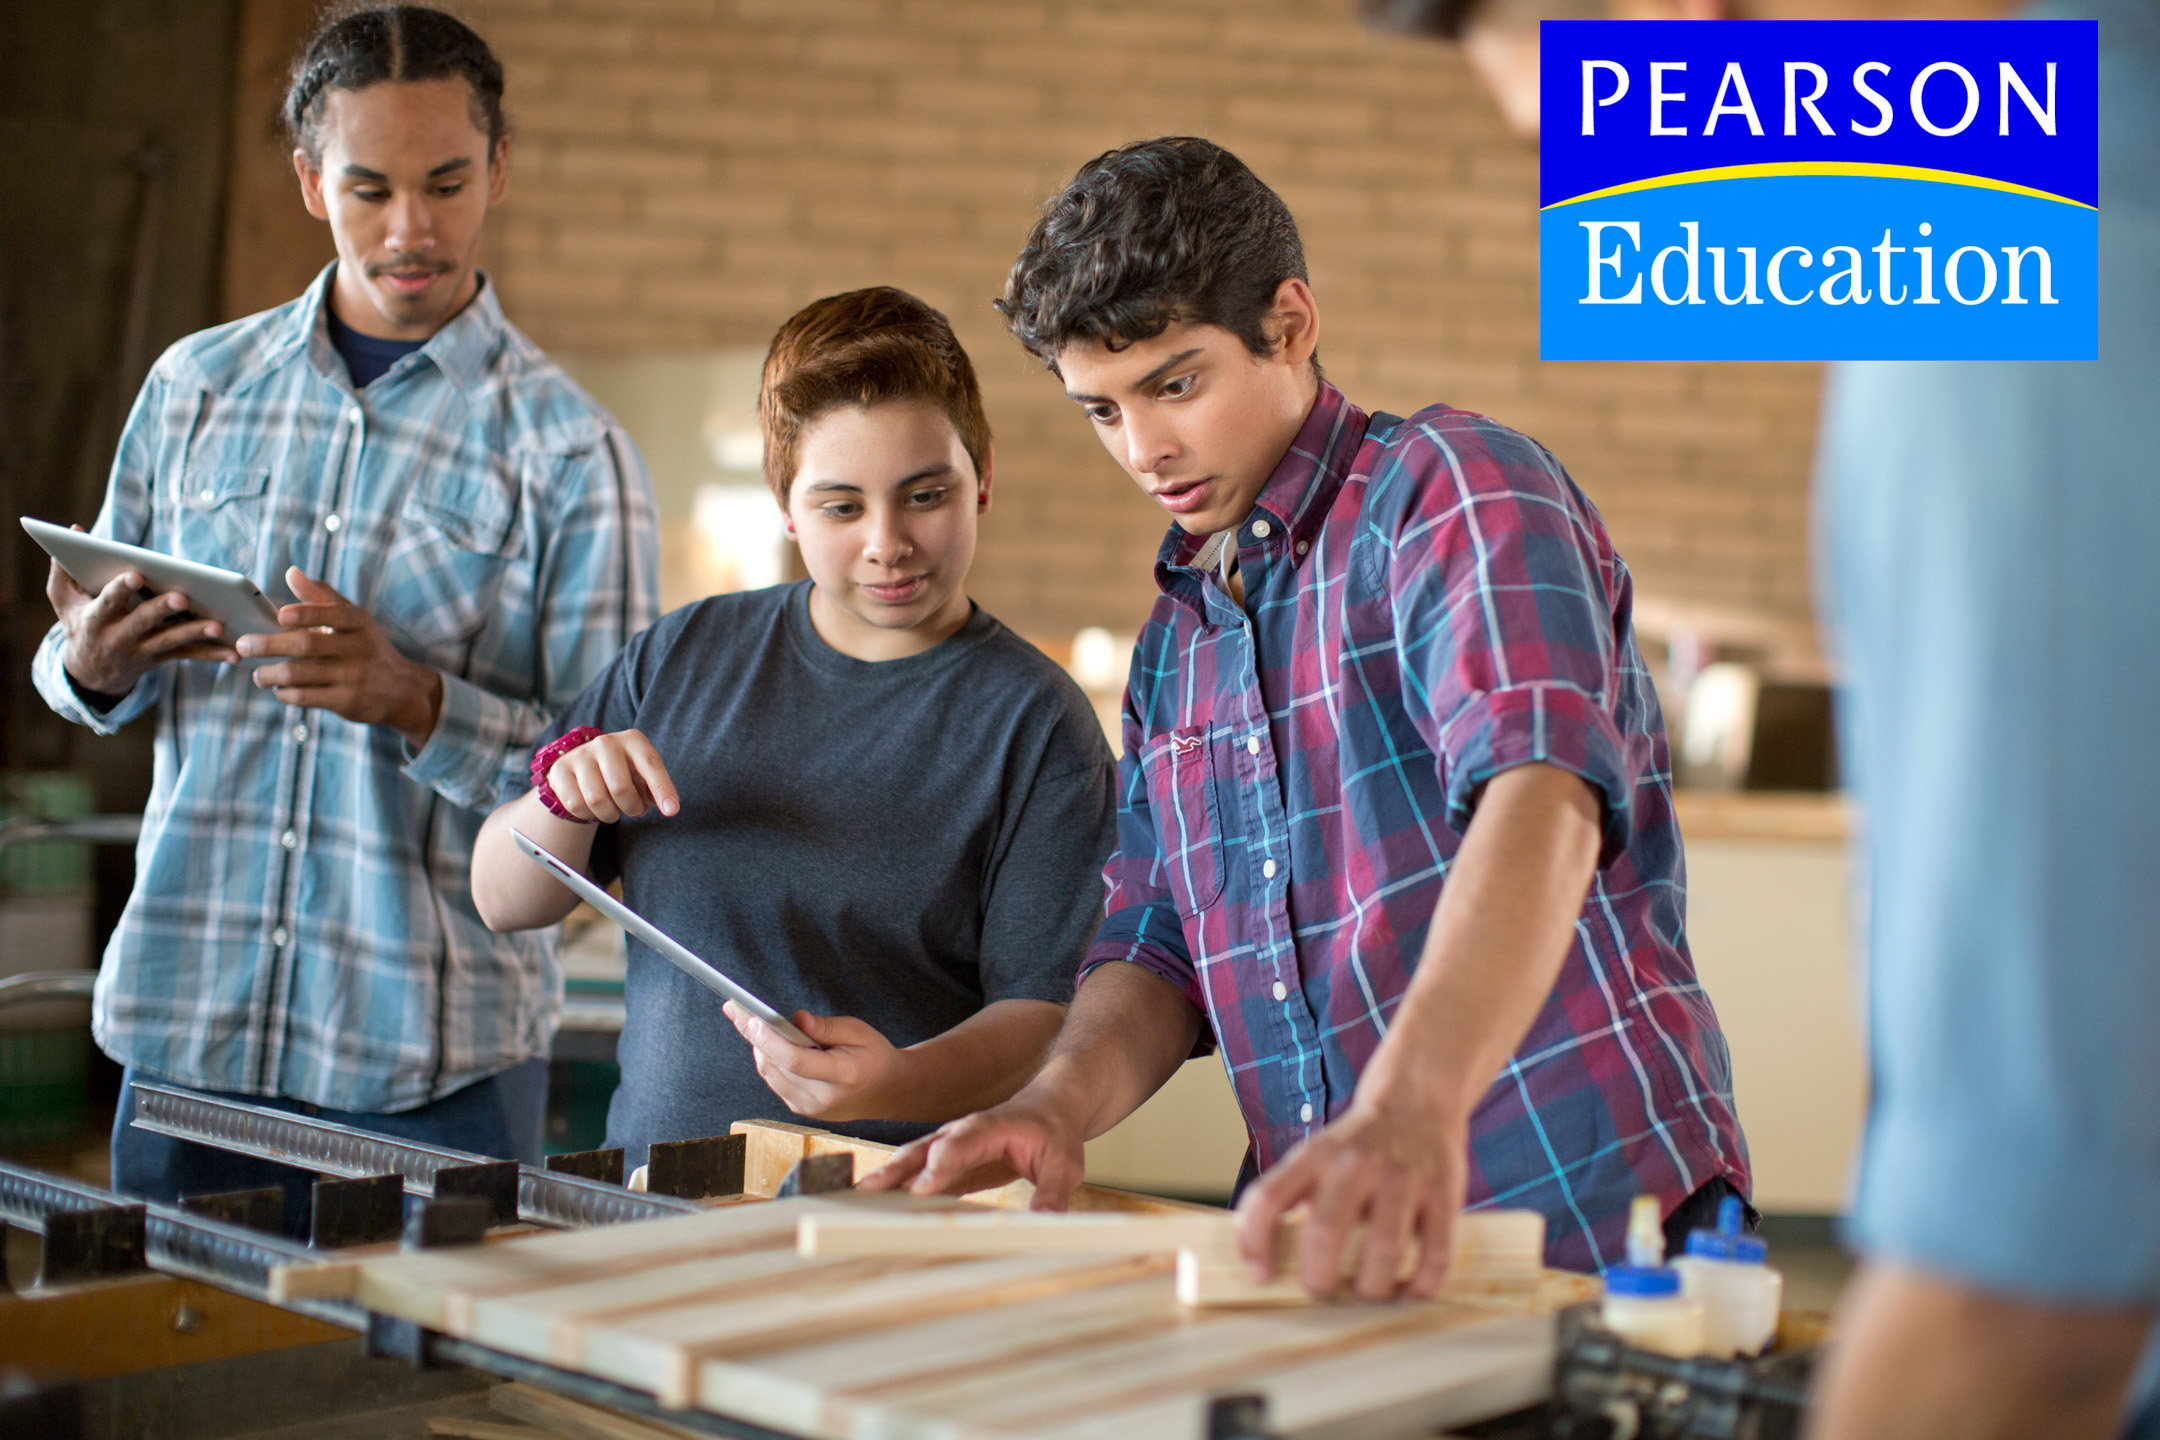 Teens work together in a wood shop in an Ad Campaign for Pearson Education photographed by Lifestyle Photographer Diana Mulvihill